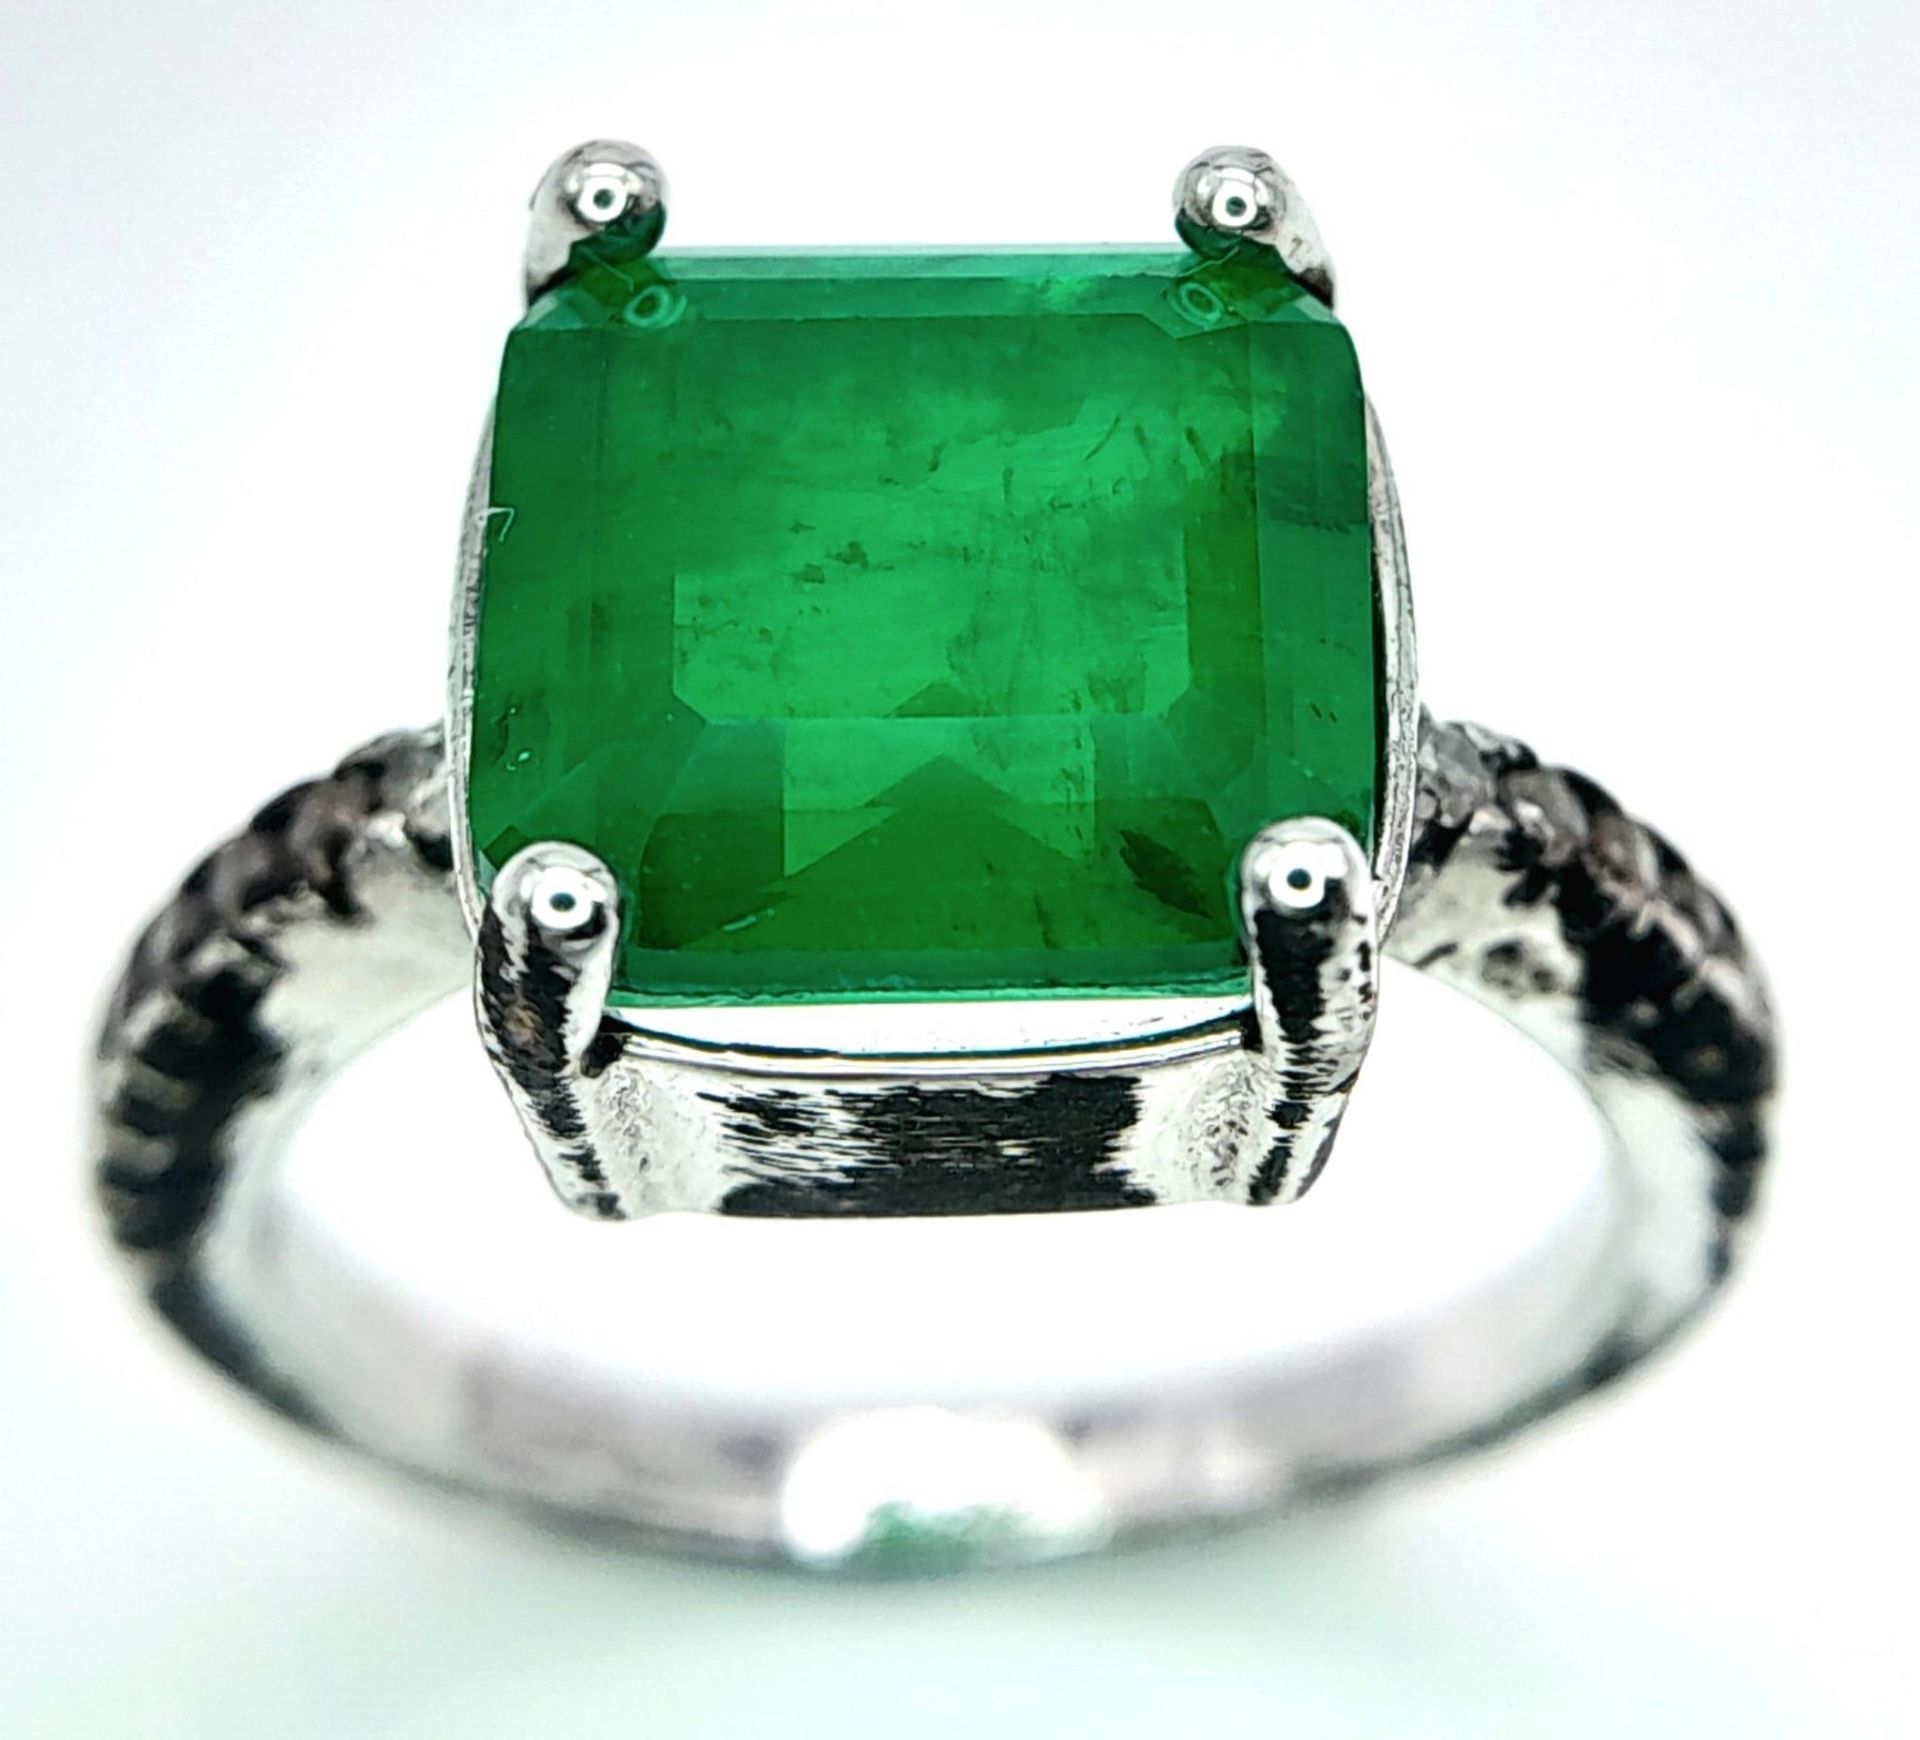 A sterling silver ring with an emerald cut green stone and cubic zirconia on the shoulders. Size: N,